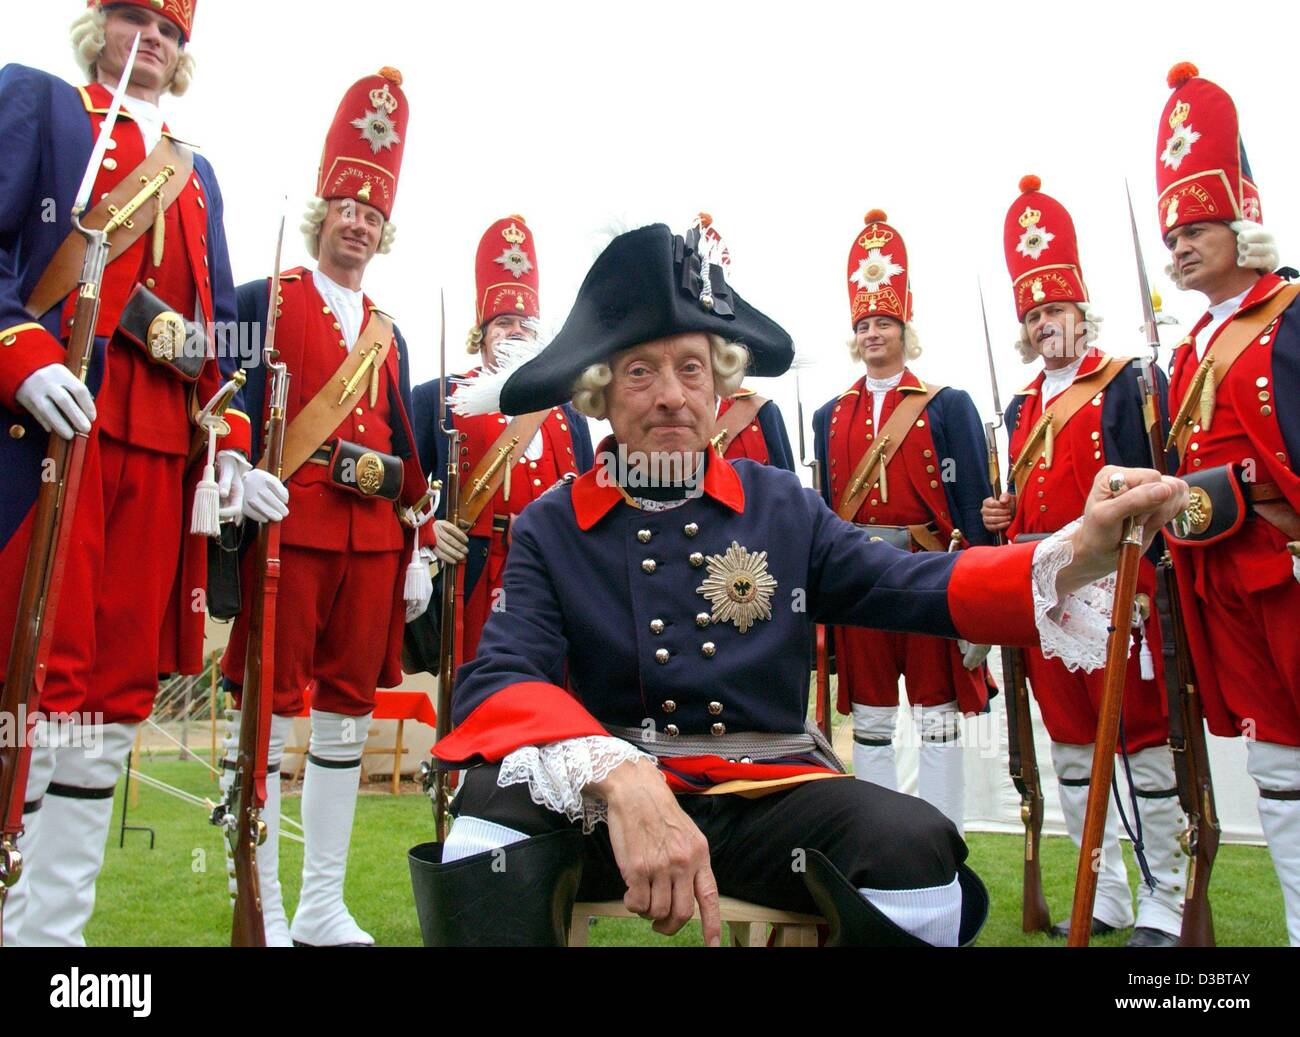 (dpa) - Rolf Zahren poses as Friedrich II (Frederick II) with his guard, the 'Lange Kerls' (big blokes), in historic uniforms in Bornstedt, Germany, 12 September 2003. The club has performances all over Europe. Stock Photo